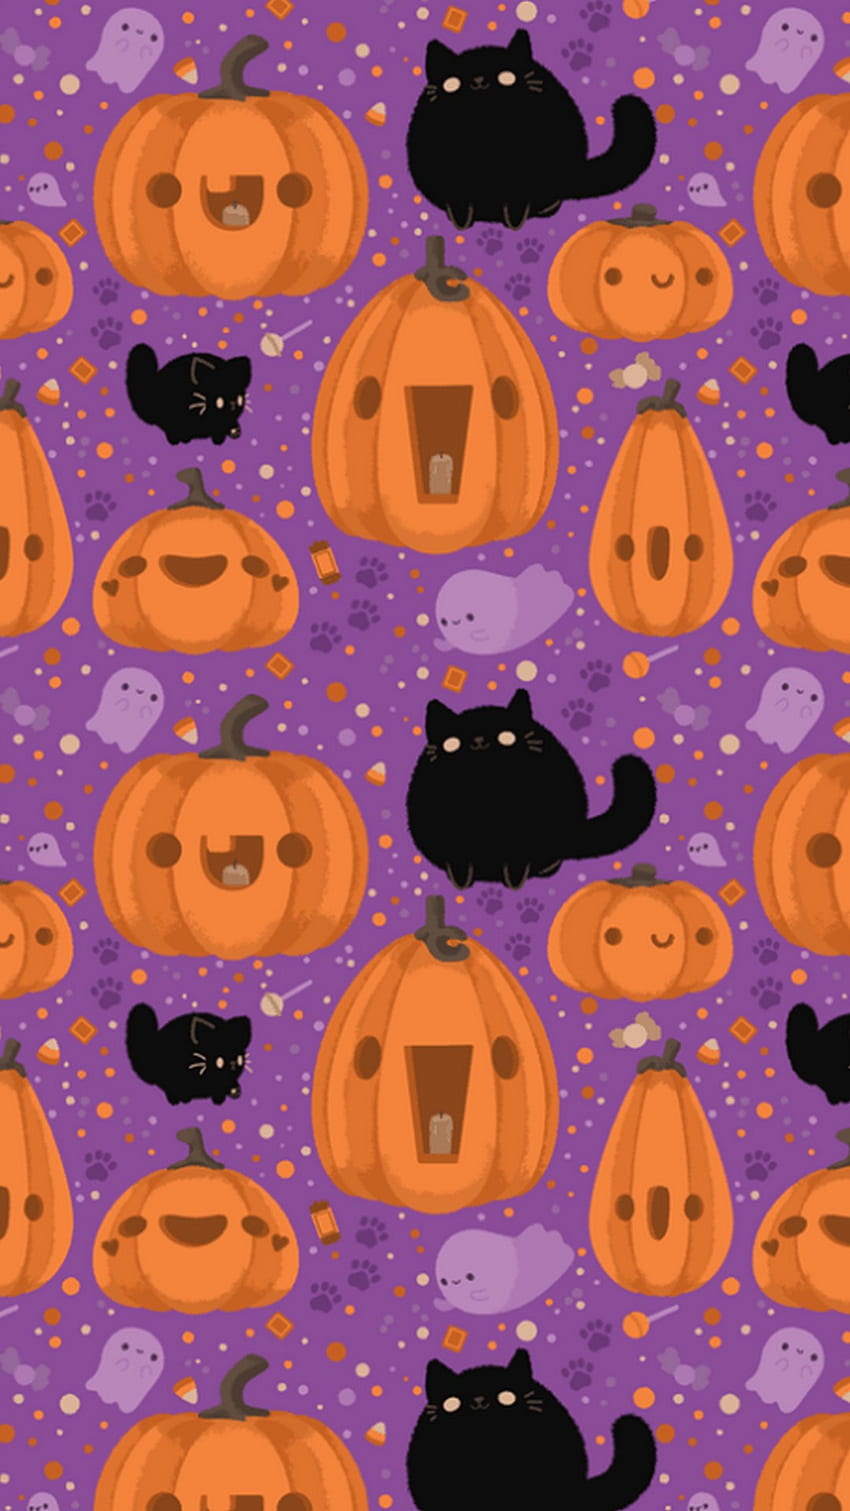 A pattern of cats and pumpkins on purple - Halloween, cute Halloween